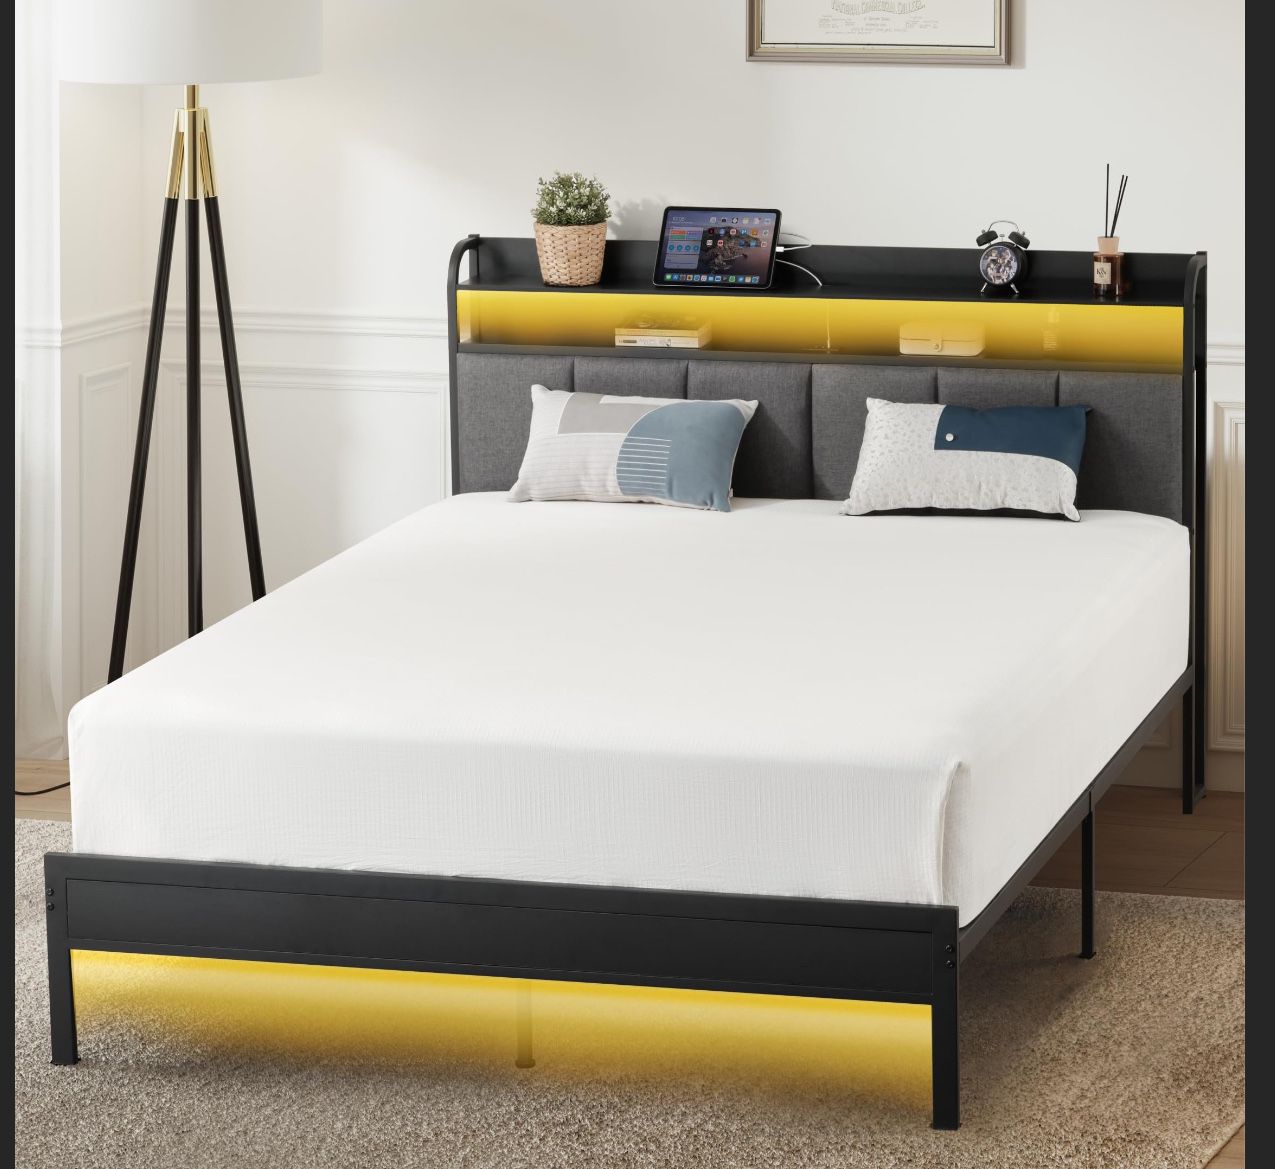 Rolanstar Twin Size Bed Frame with LED Lights, Upholstered Headboard, Charging Station, Storage Shelves, Heavy Duty Metal Slats, No Box Spring Needed,